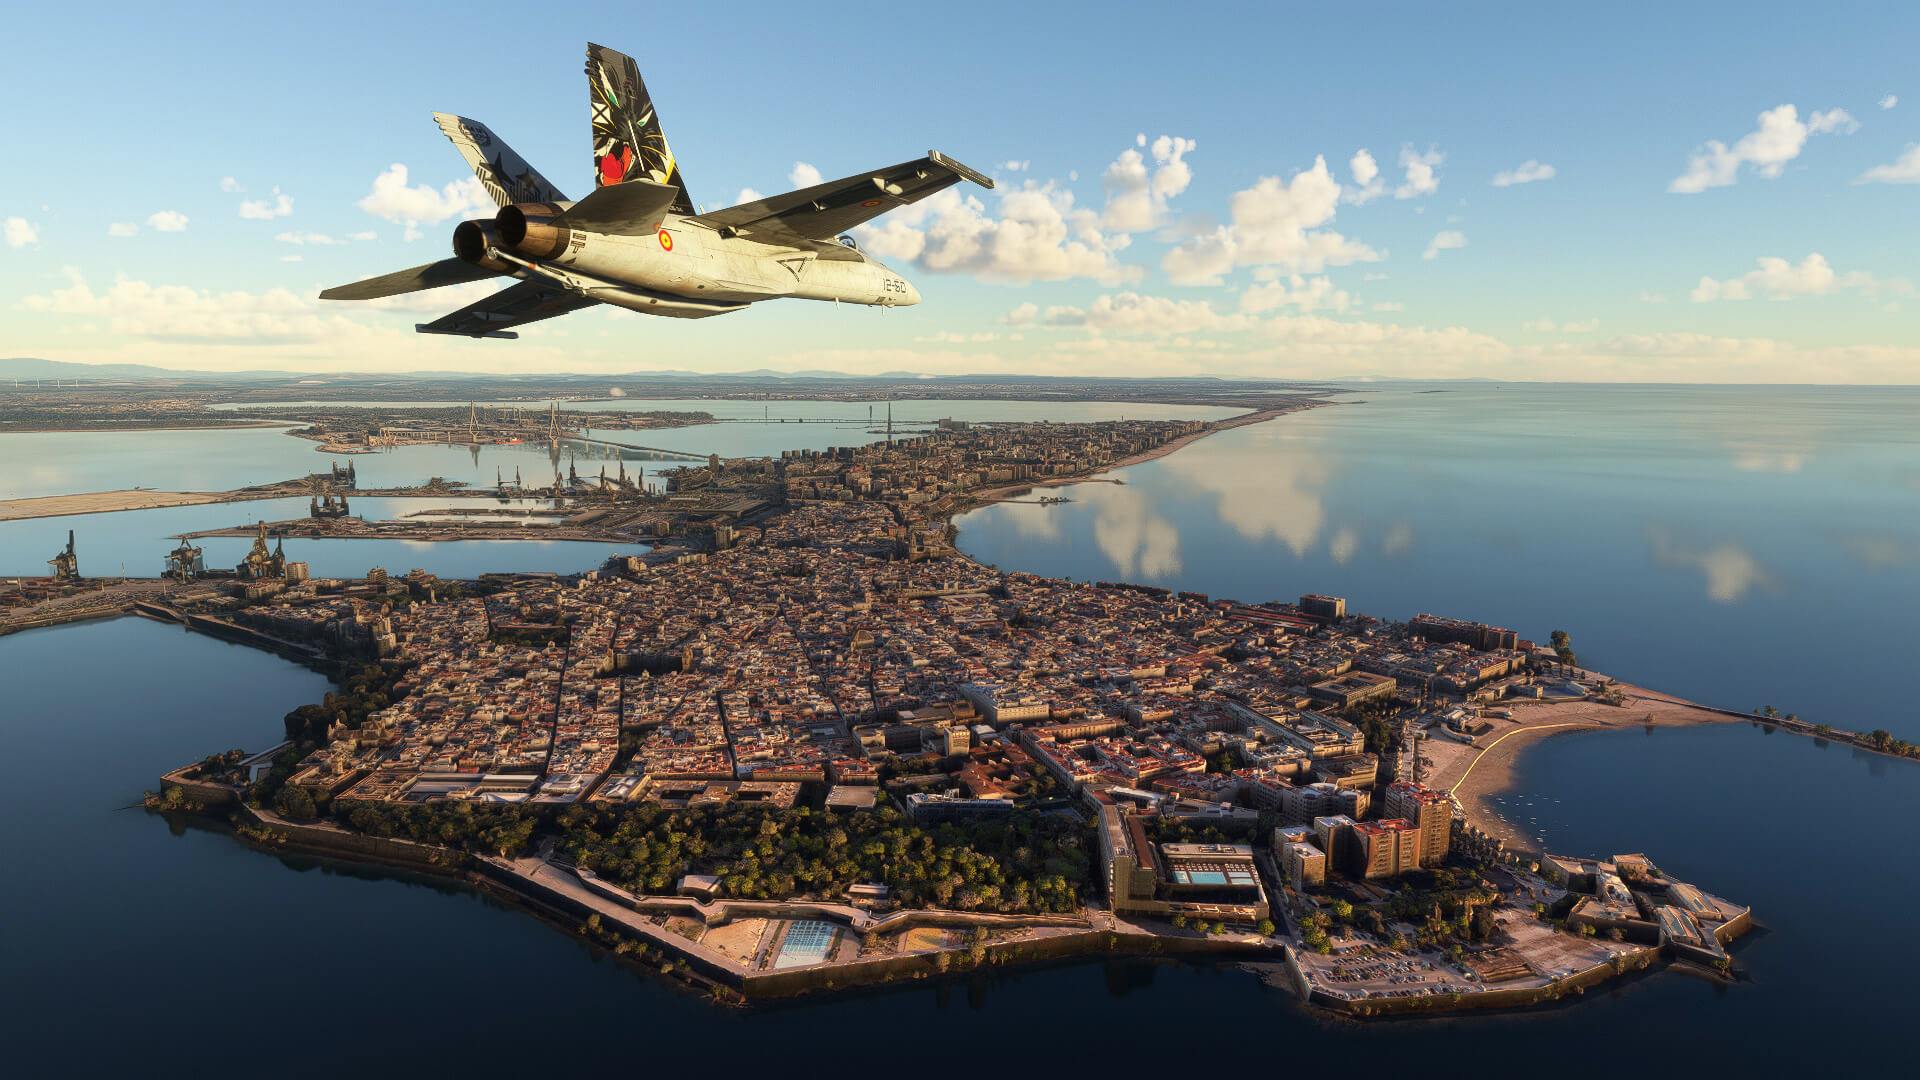 An F/A-18 passes over a city at low altitude